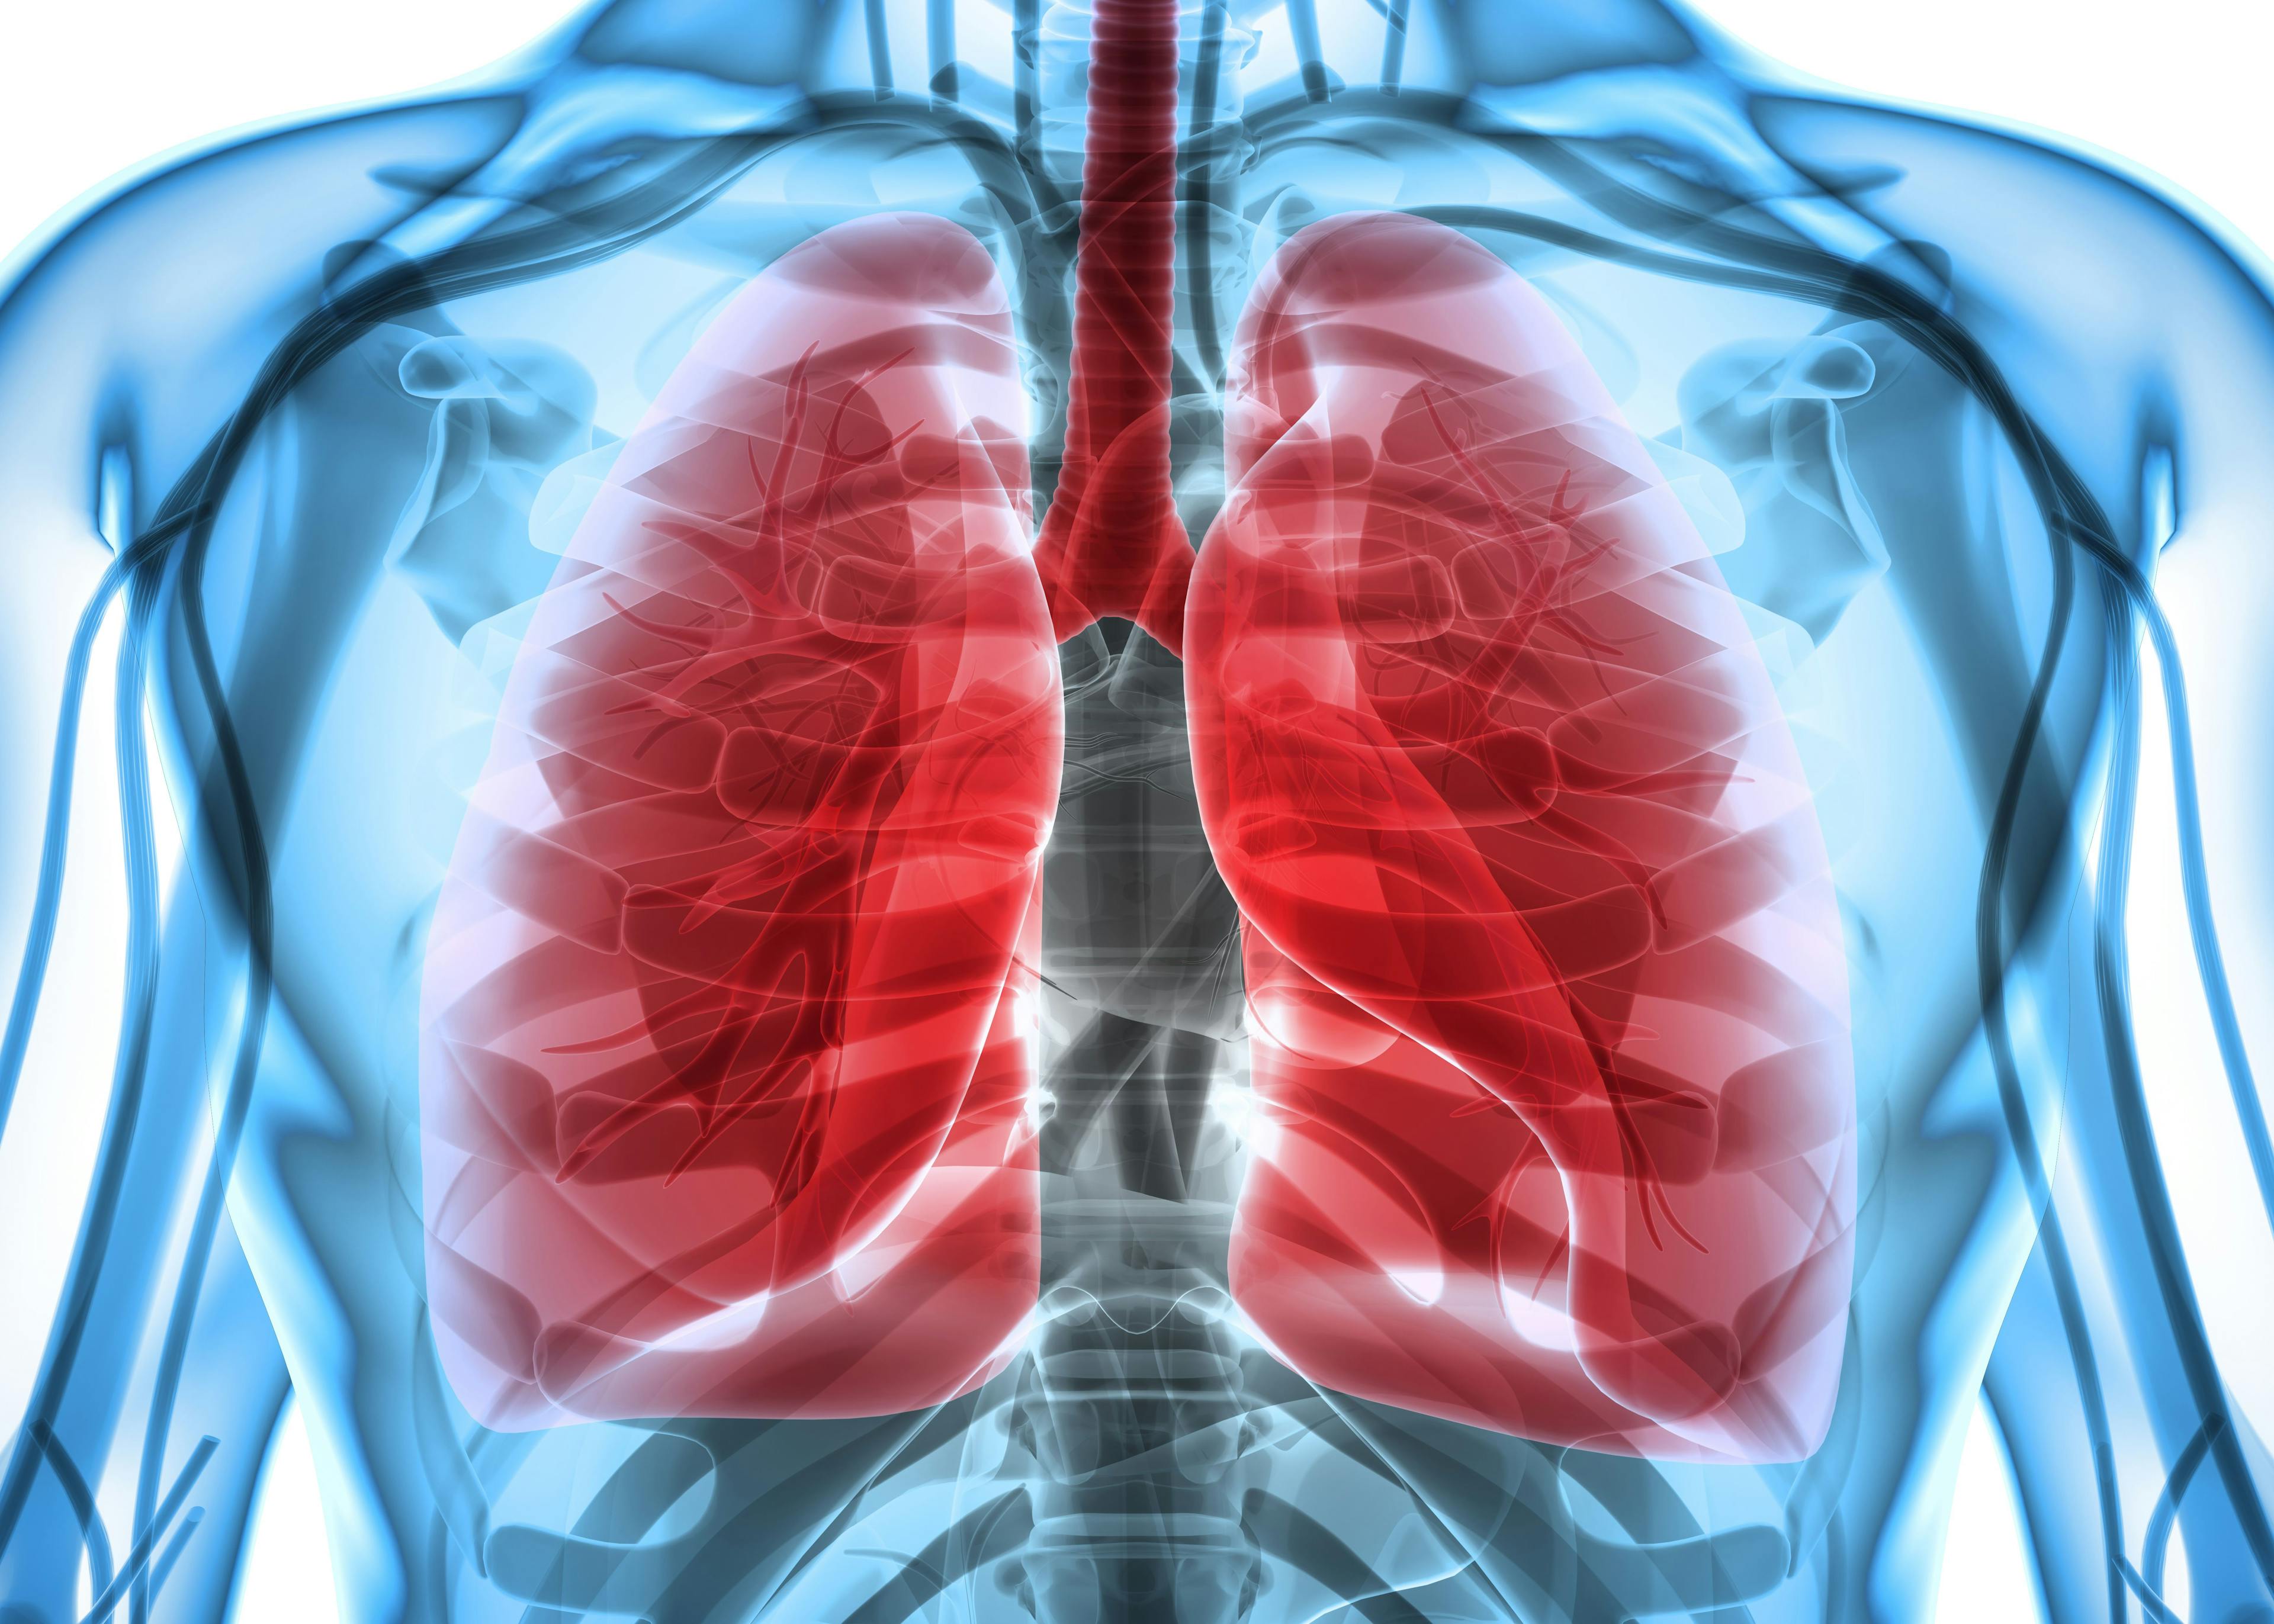 COPD and Asthma May Not Be Risk Factors for COVID-19, Study Says